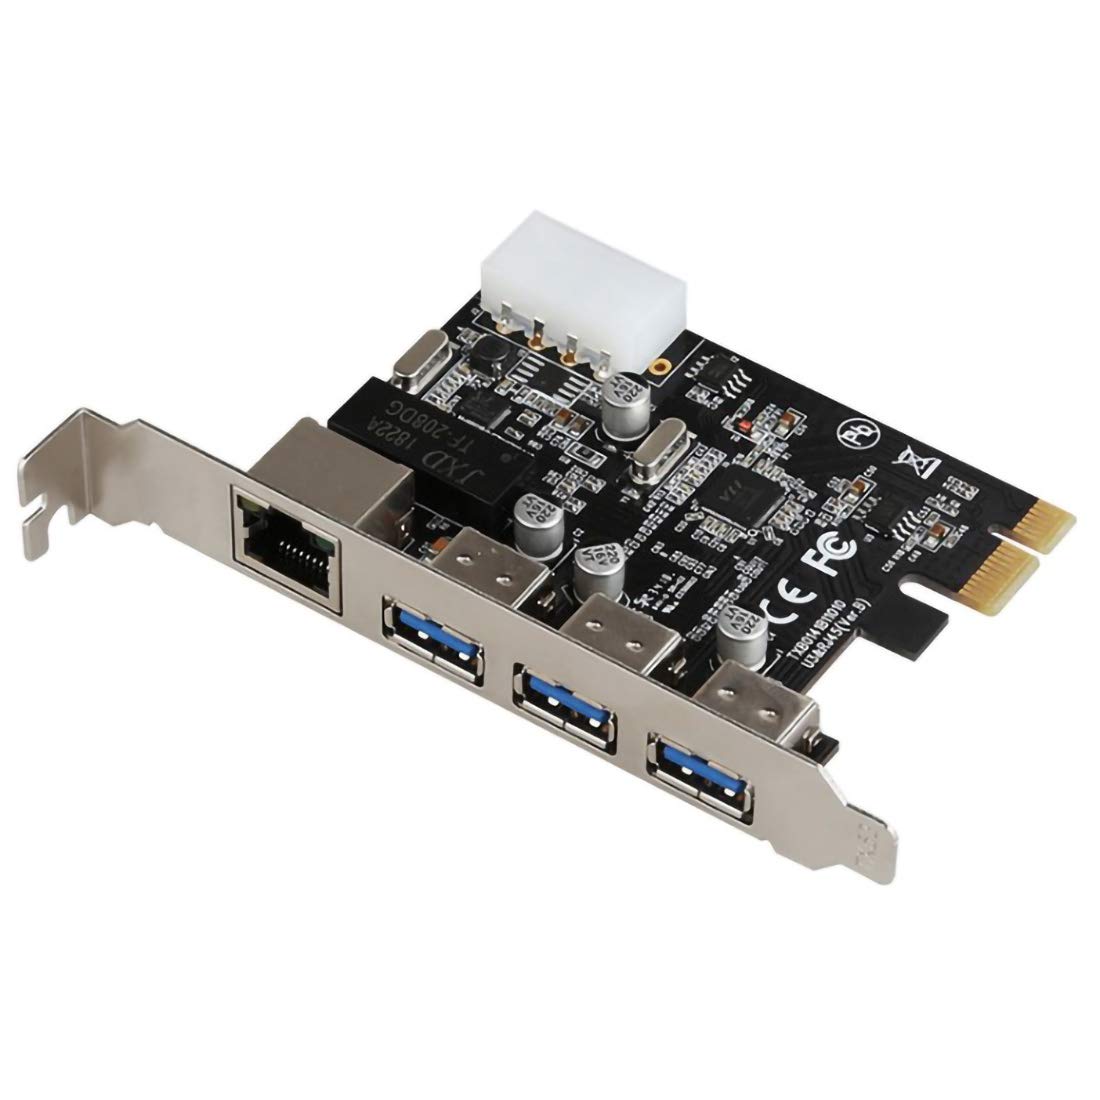 USB Ethernet Adapter: Purchase an adapter that plugs into a USB port and provides an Ethernet connection.
PCI Ethernet Card: Install a new Ethernet card into an available PCI slot on the motherboard.